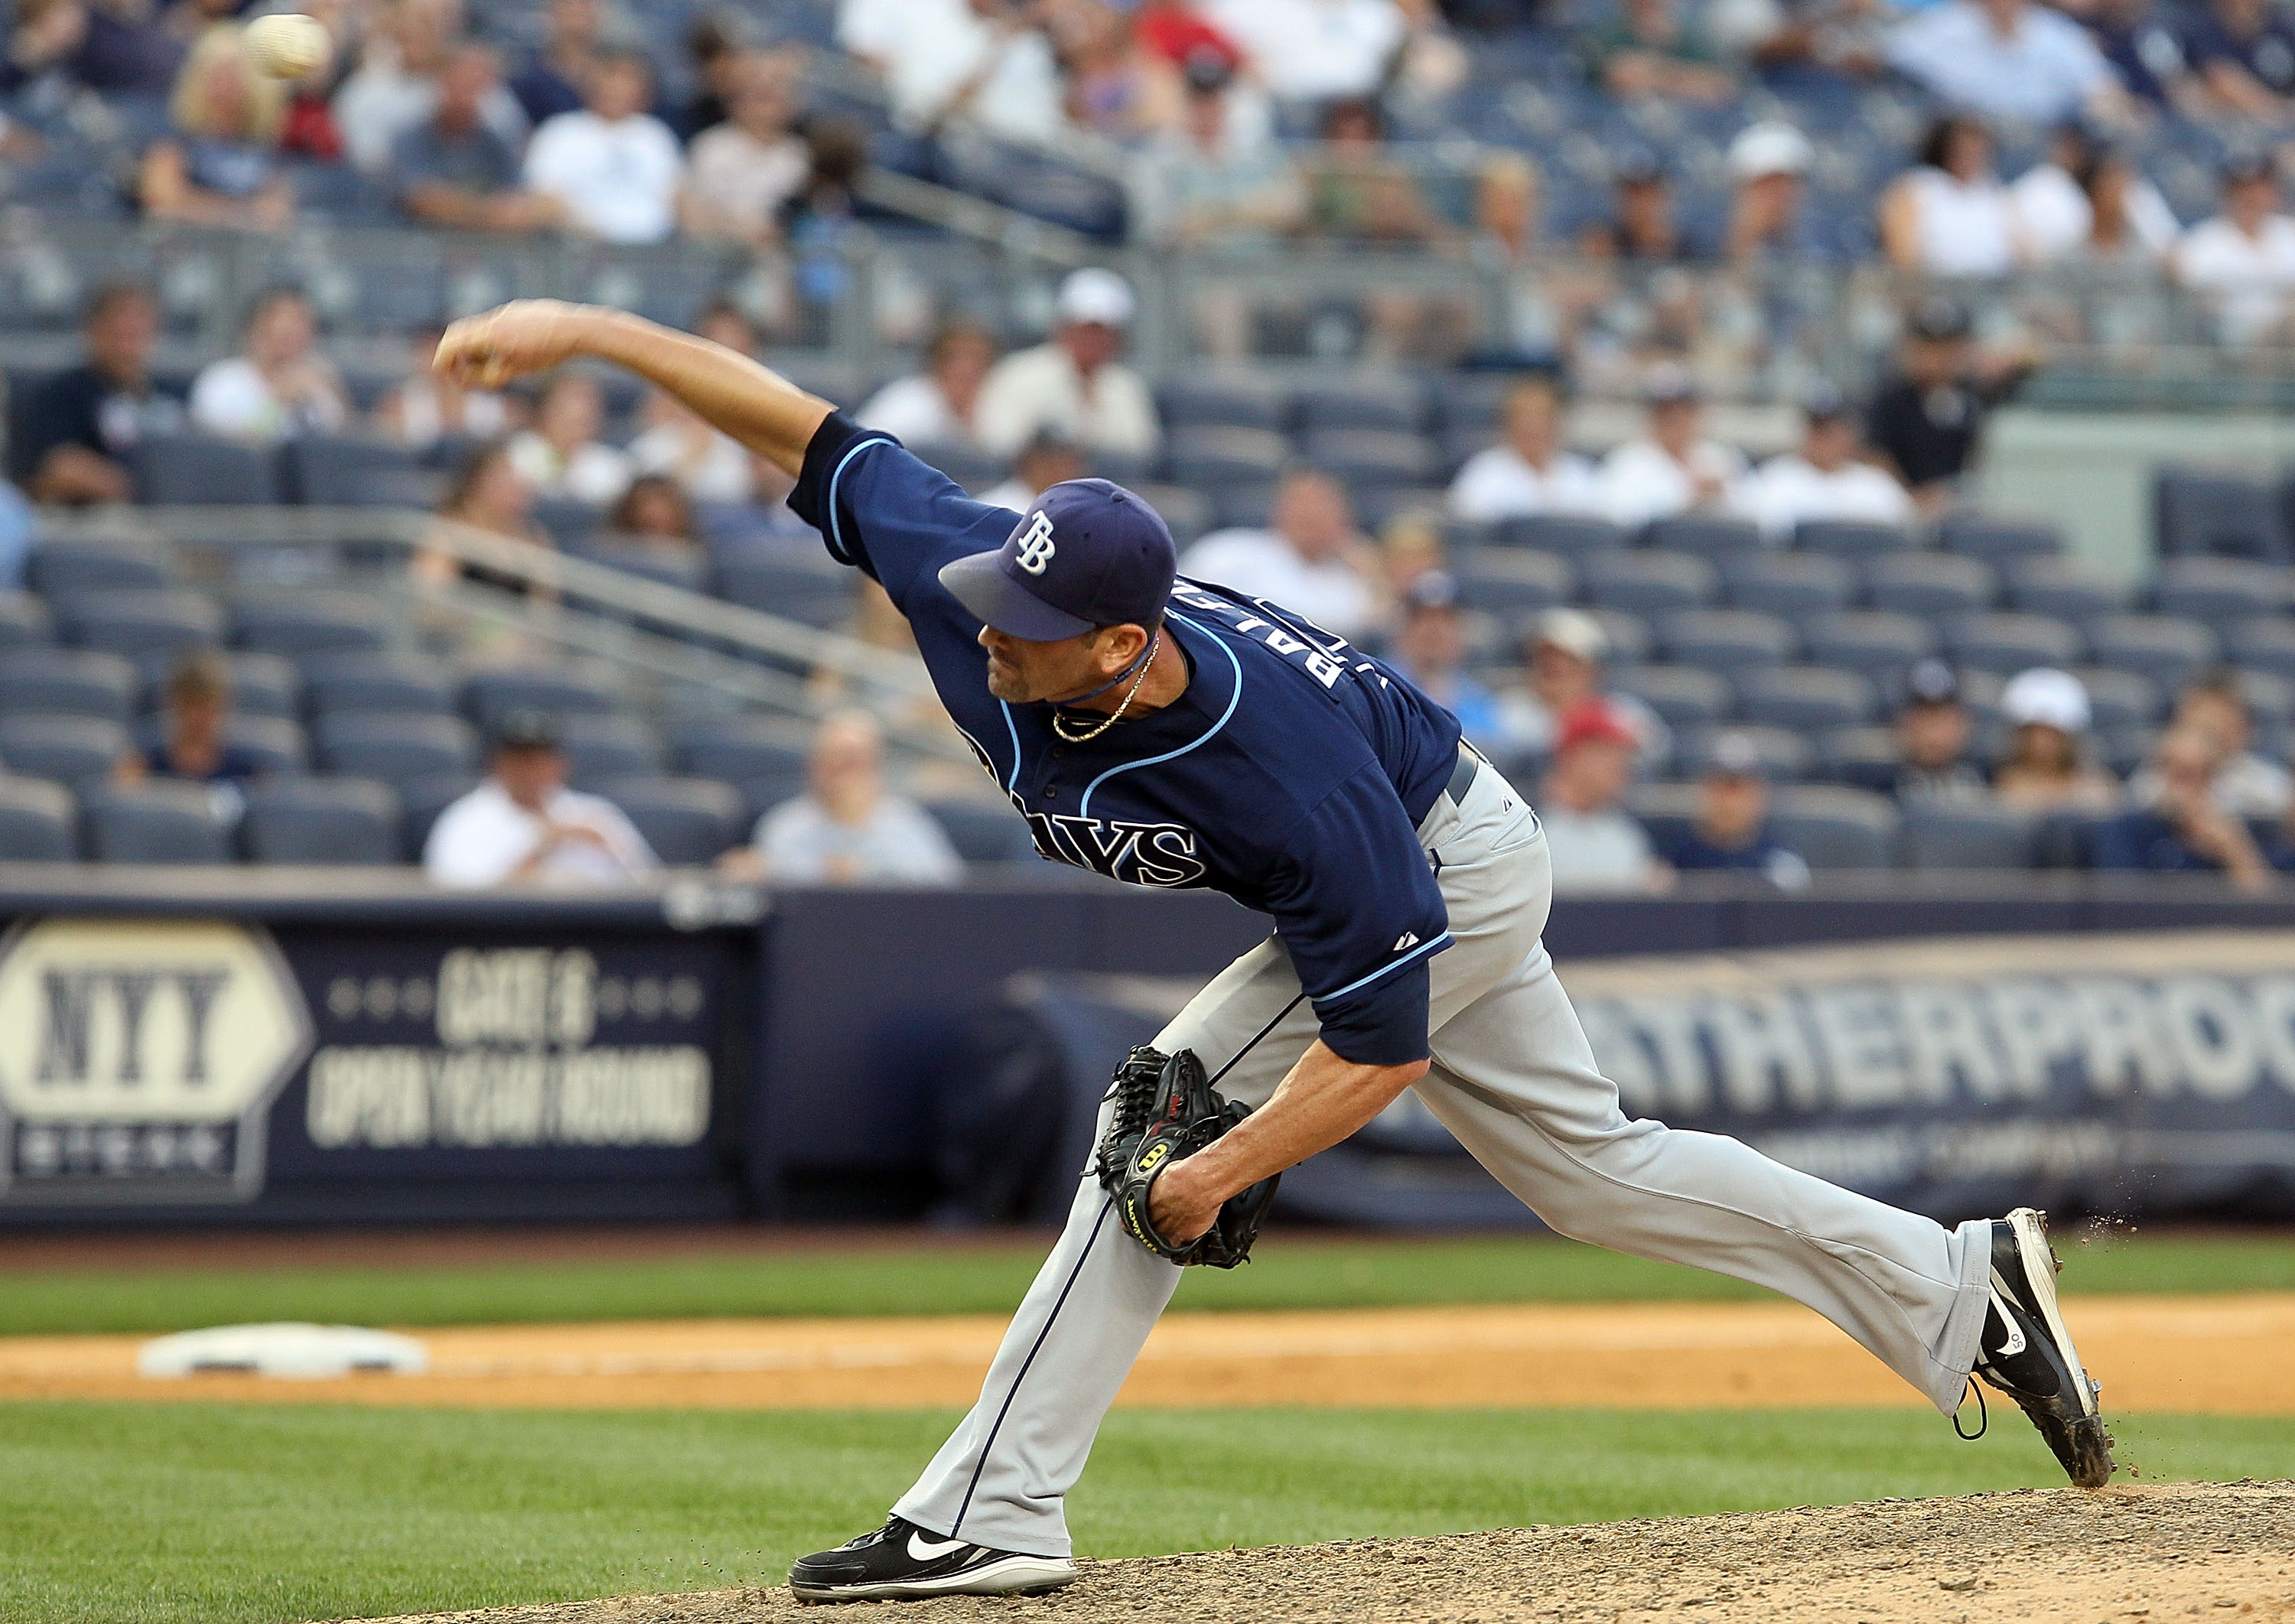 NEW YORK - JULY 17:  Grant Balfour #50 of the Tampa Bay Rays delivers a pitch against the New York Yankees on July 17, 2010 at Yankee Stadium in the Bronx borough of New York City. The Rays defeated the Yankees 10-5.  (Photo by Jim McIsaac/Getty Images)